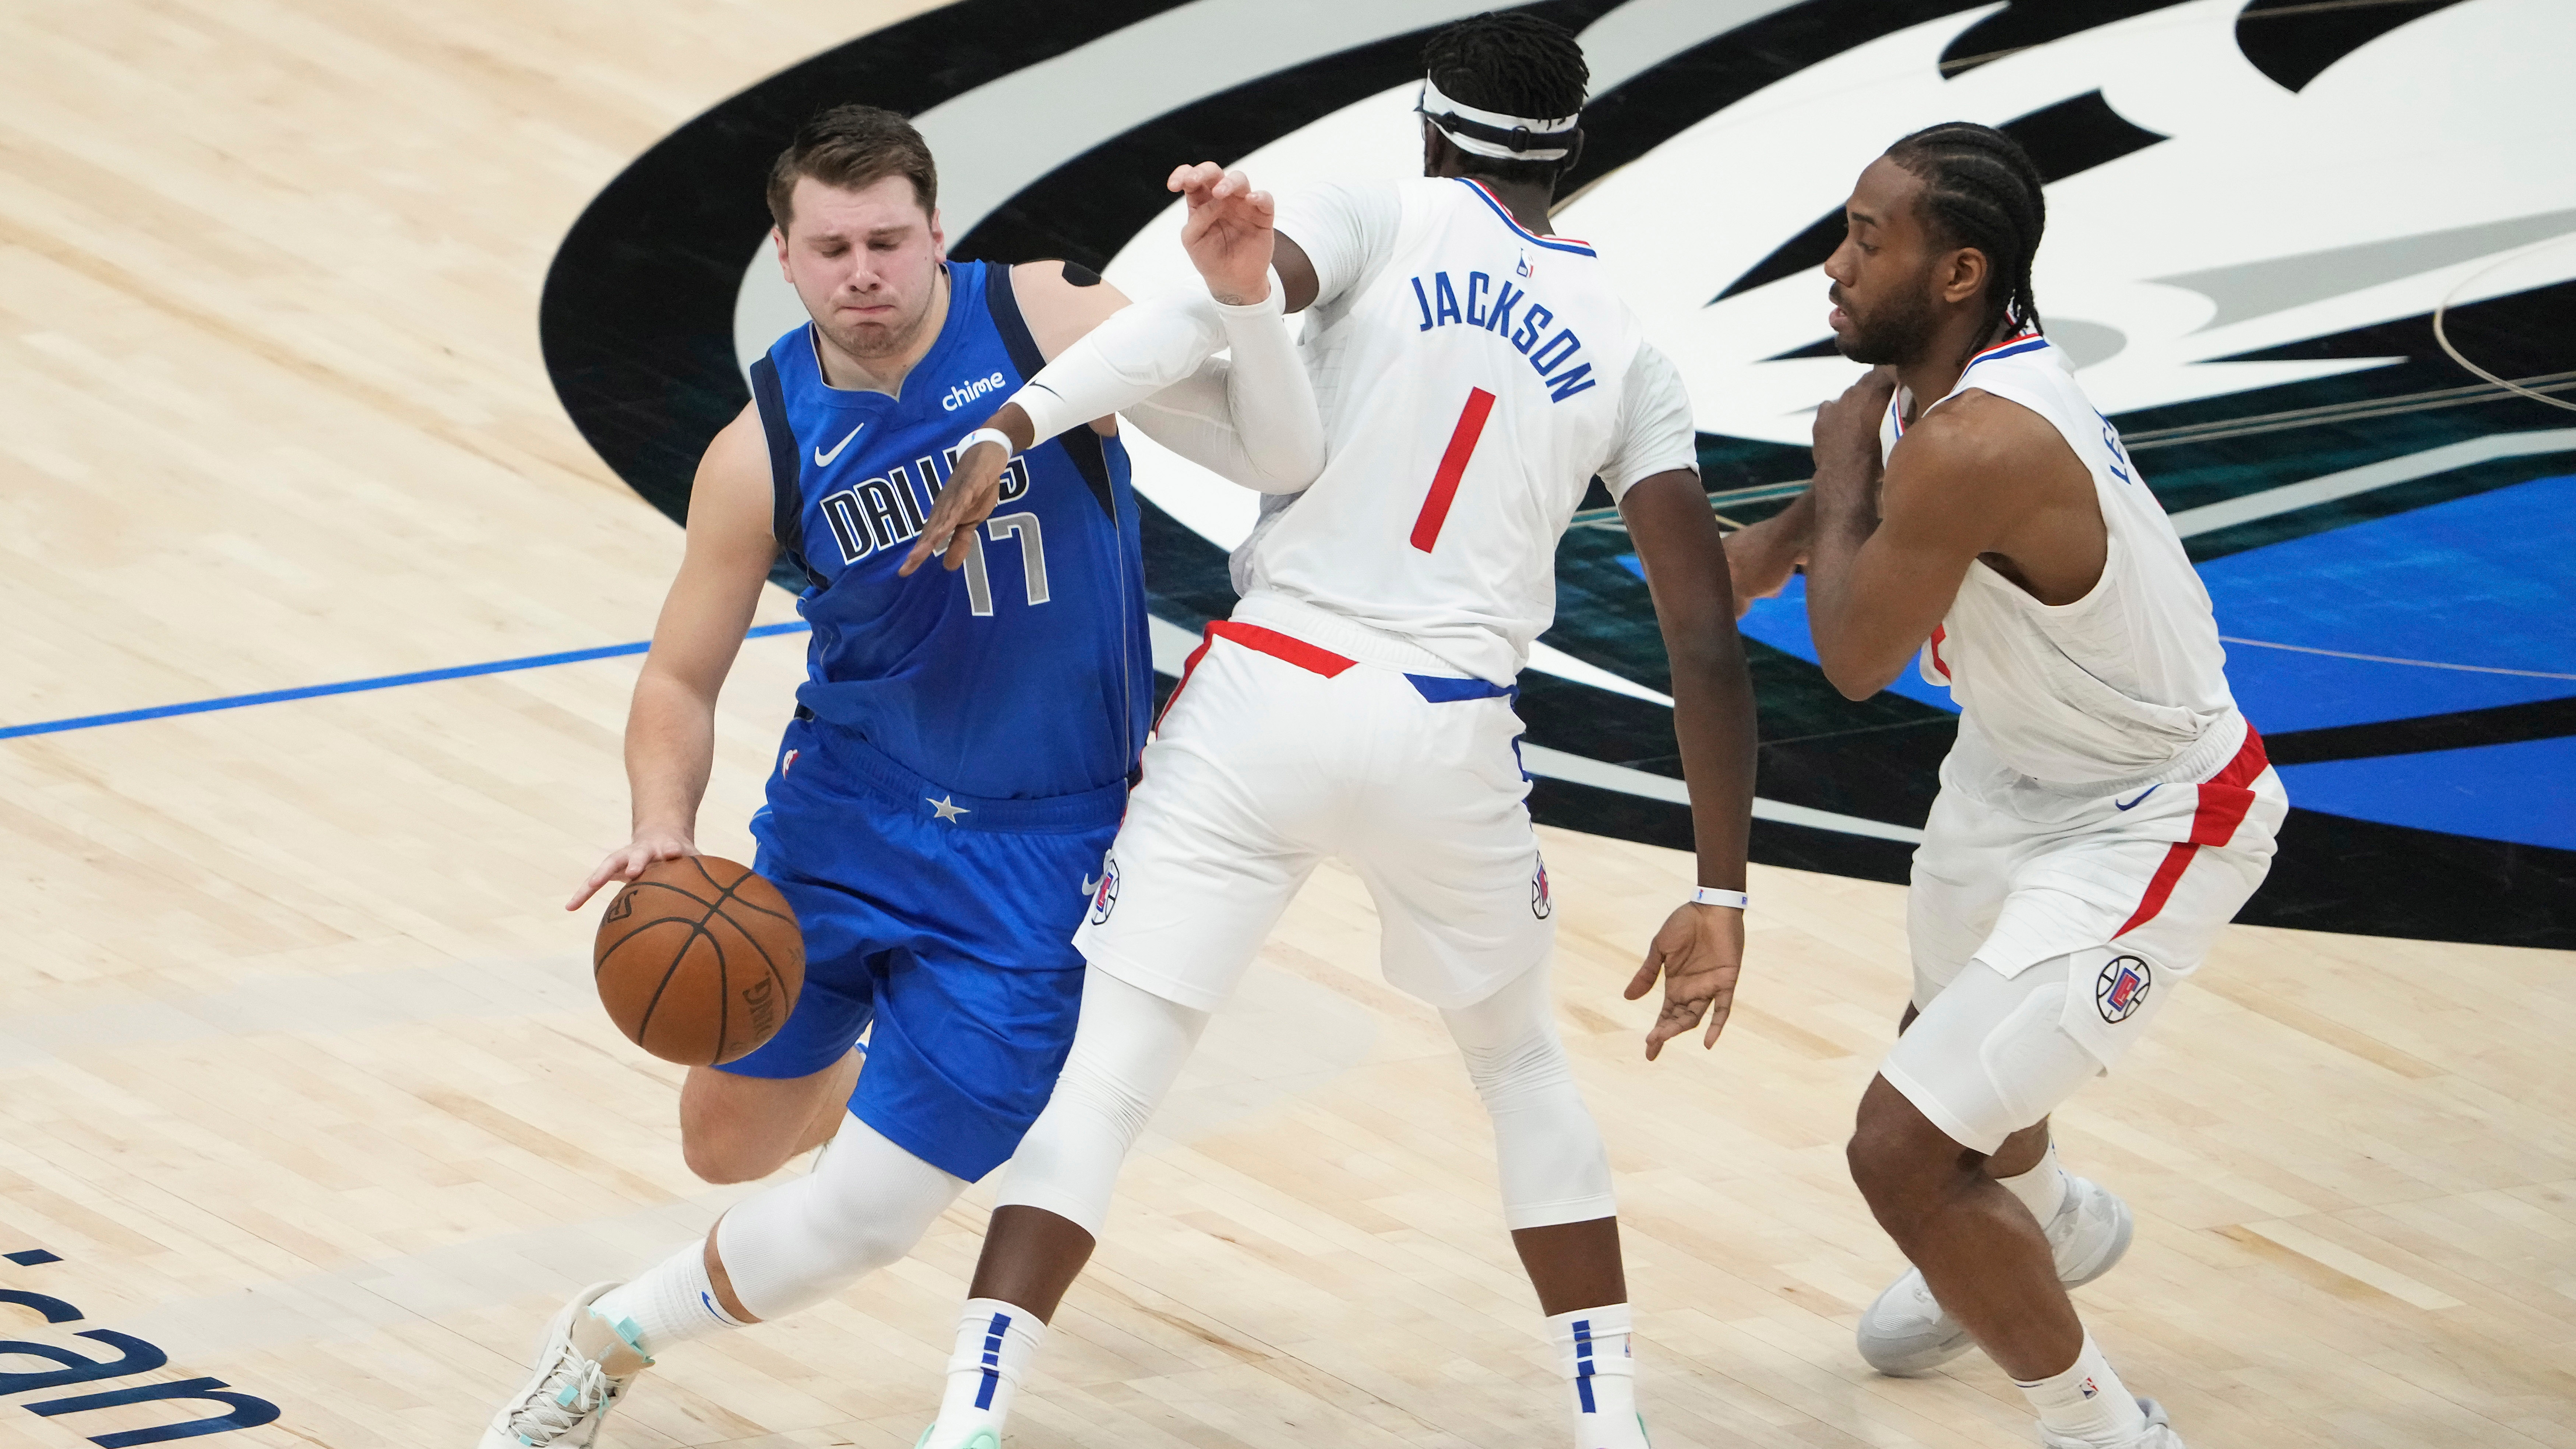 Playoff basketball is back in Dallas, and so are big crowds - Mavs